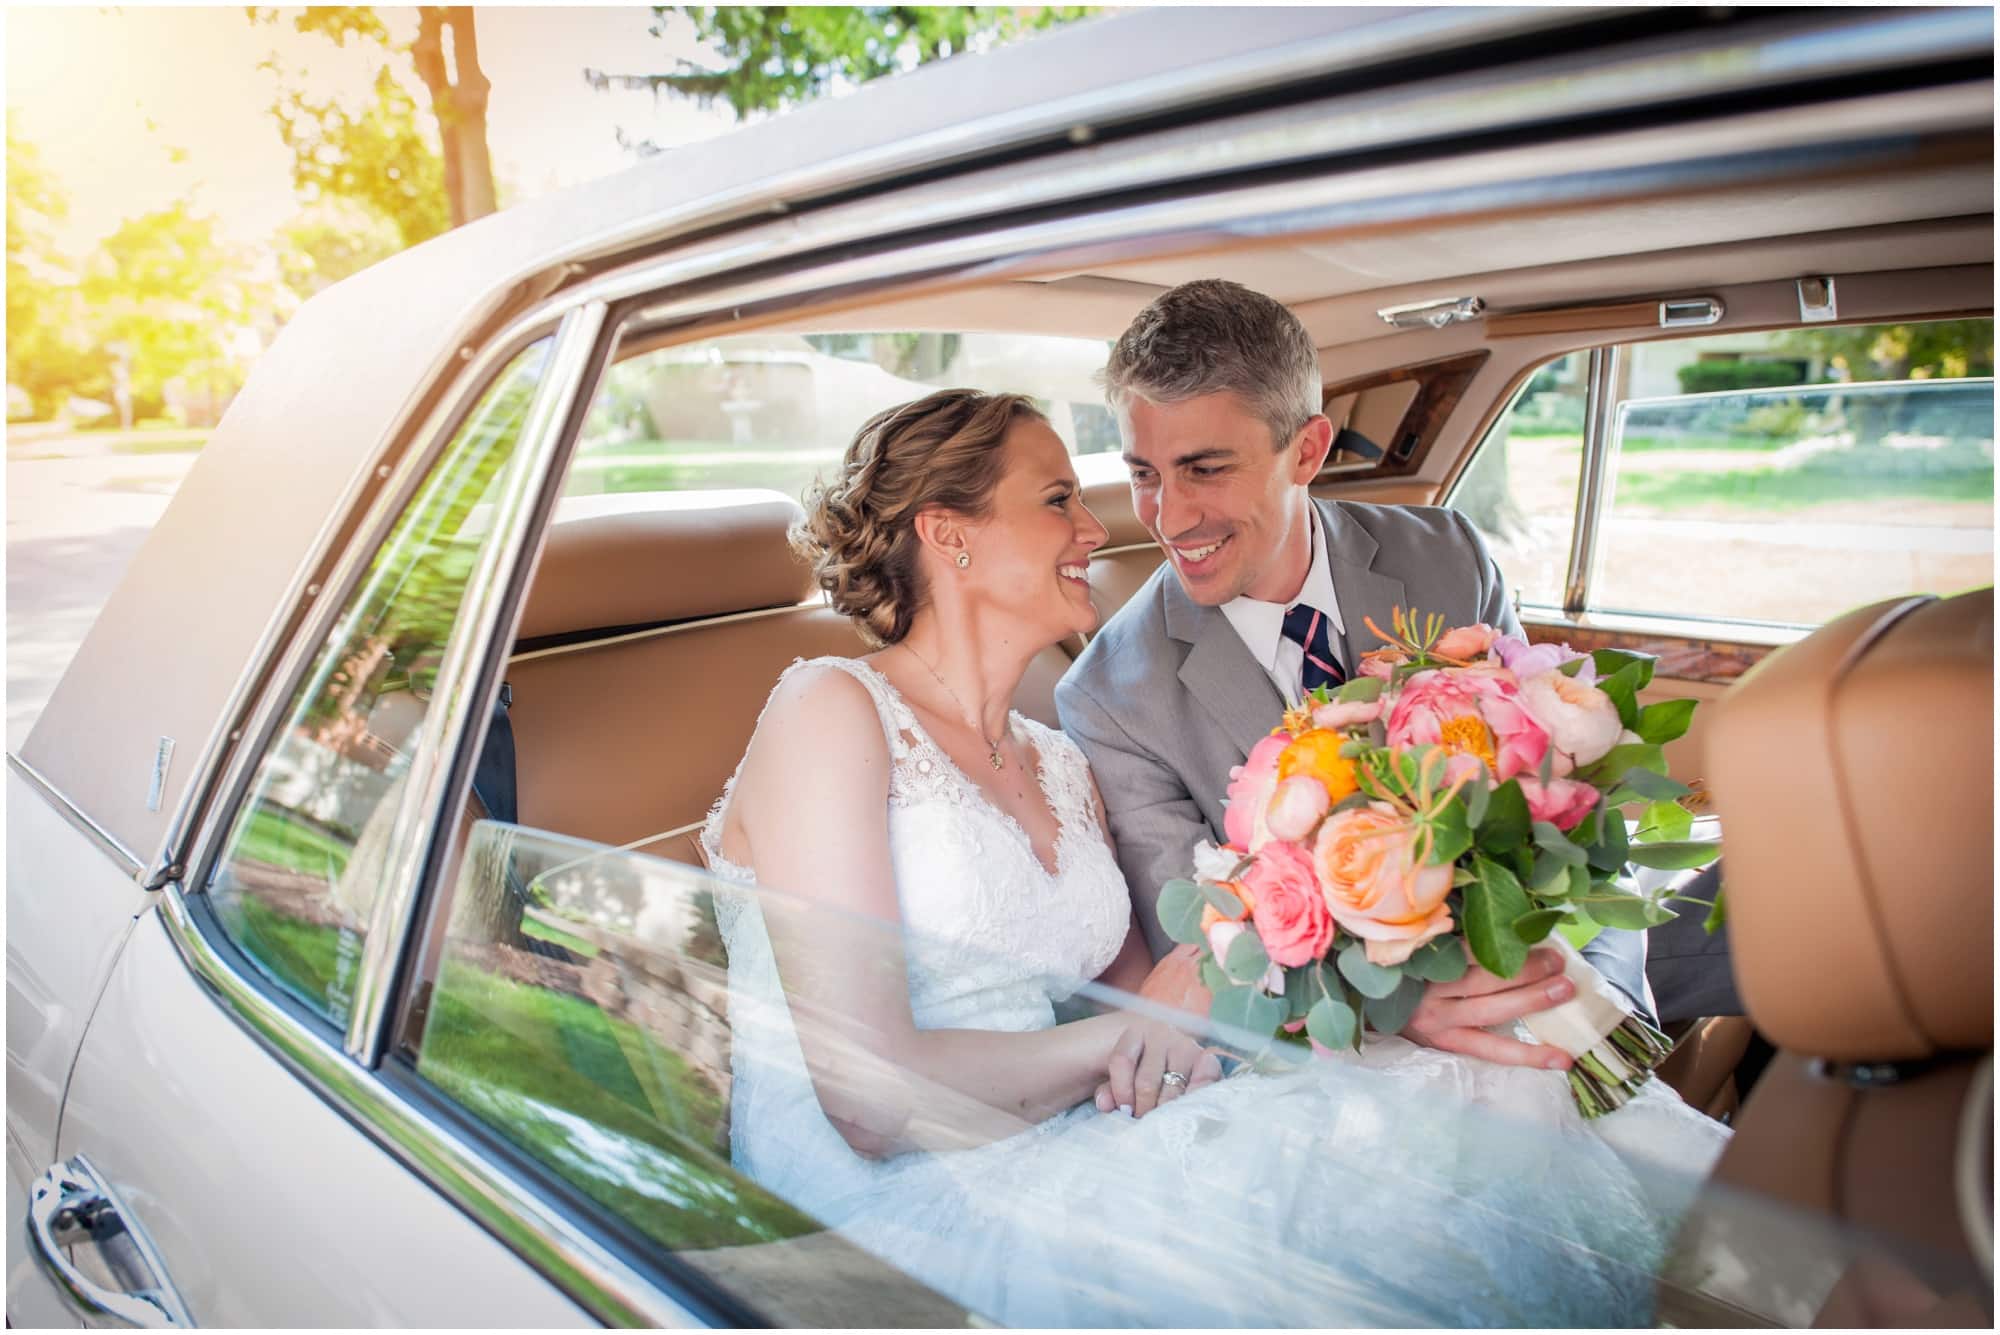 bride and groom looking at eachother in the back of a vintage car on wedding day from the window frame on the way to Hyatt McDonalds Lodge Oak Brook Wedding Photographer